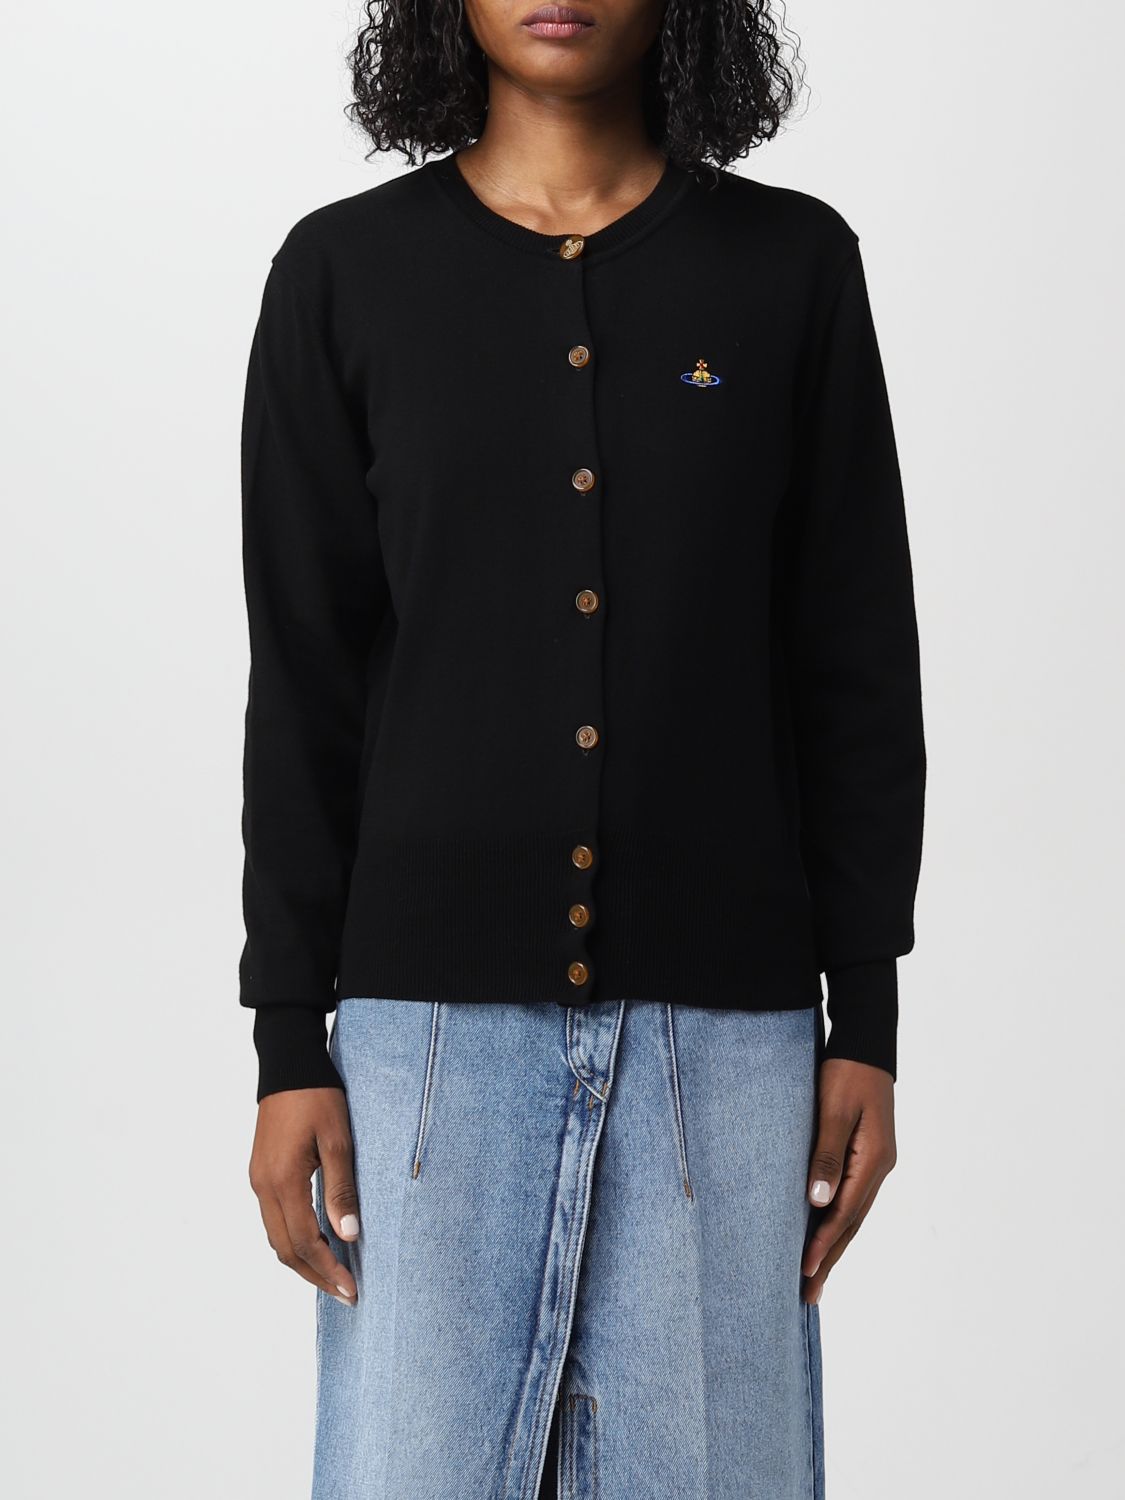 Vivienne Westwood Orb Embroidered Knit Cardigan In Black | ModeSens